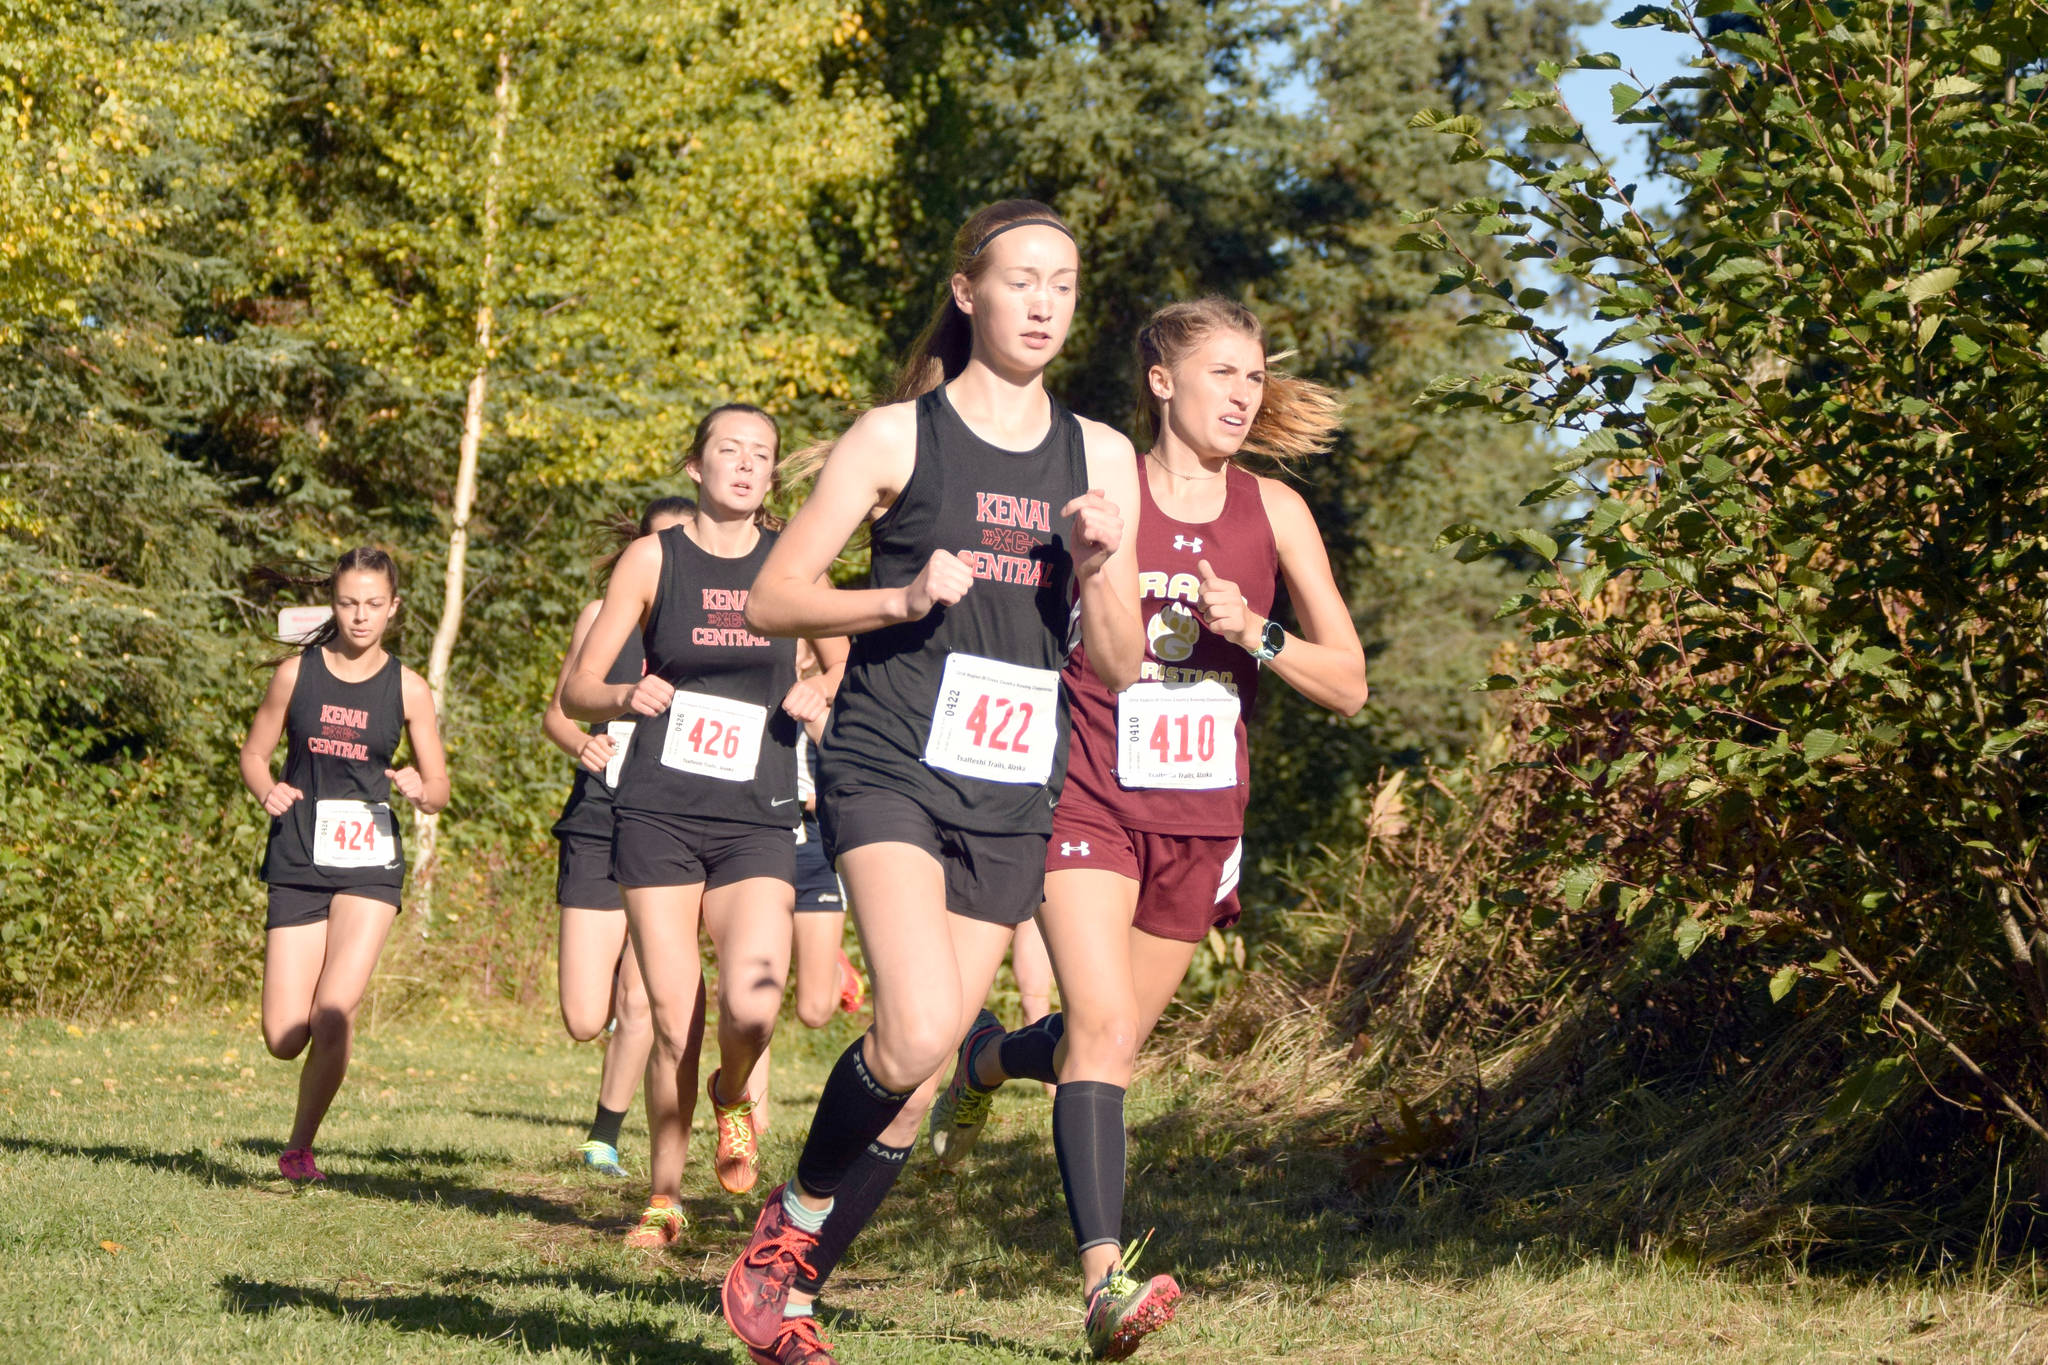 Kenai Central’s Jaycie Calvert leads Grace Christian’s Mazzy Jackson, and Kenai Central’s Brooke Satathite and Summer Foster, early in the Division II girls race at the Region 3 meet Saturday, Sept. 22, 2018, at Tsalteshi Trails. (Photo by Jeff Helminiak/Peninsula Clarion)